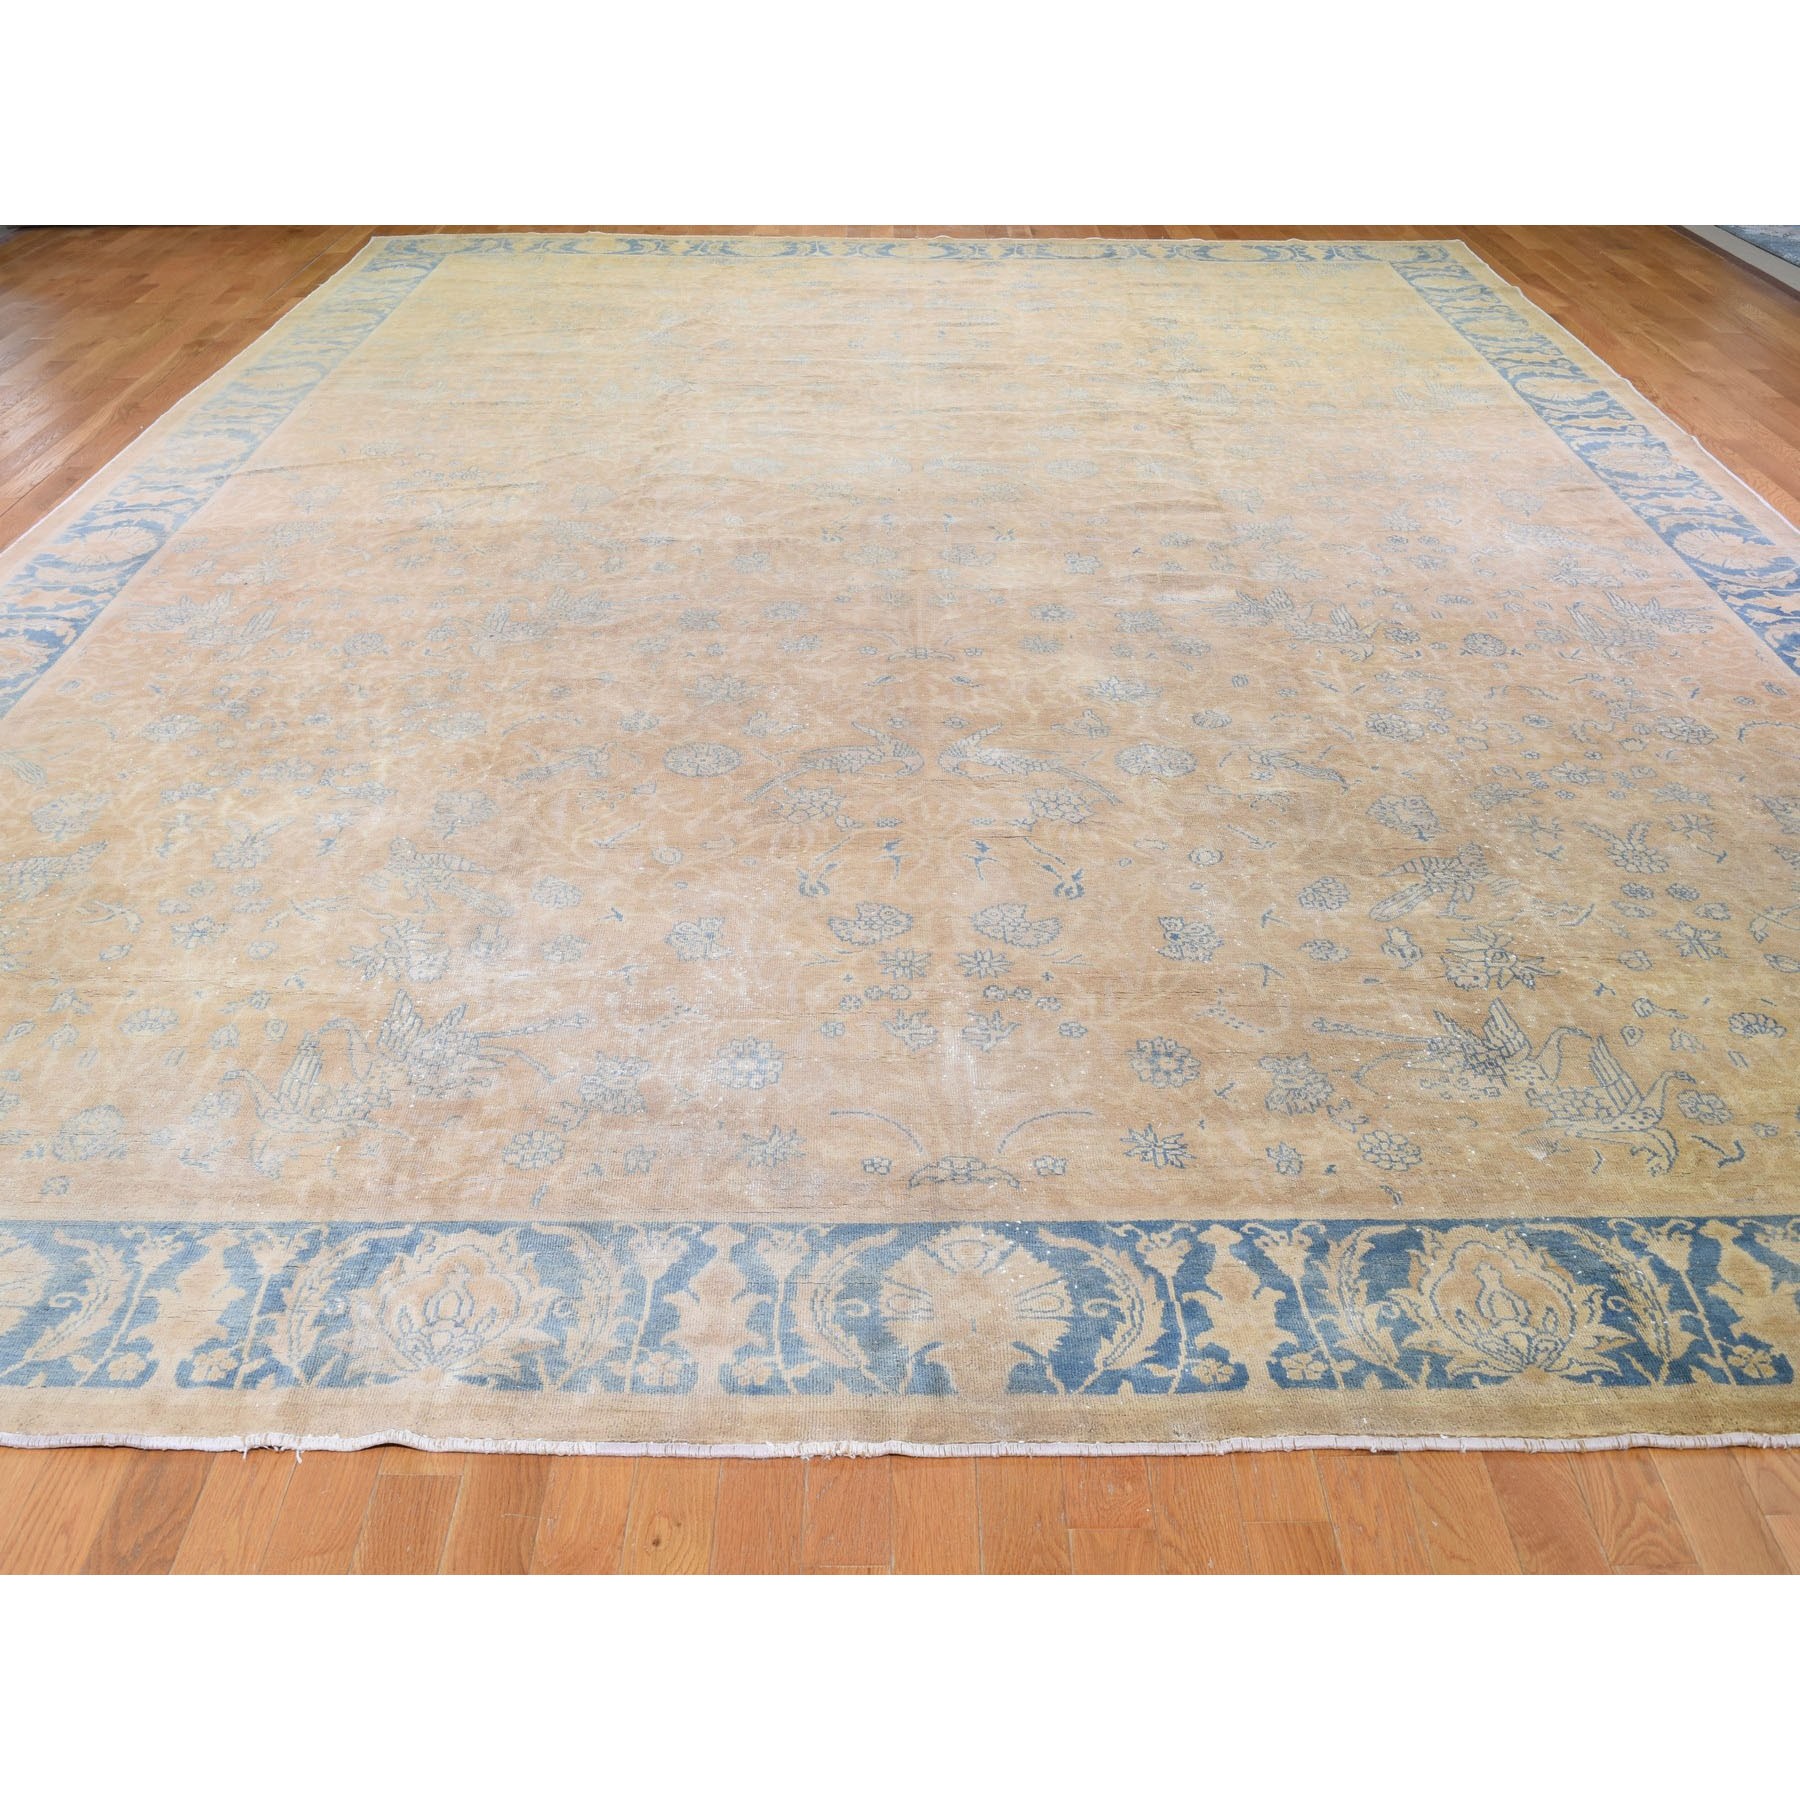 12-9 x17-3  Oversized Beige Antique Turkish Sivas With Parrots and Swans Hand Knotted Oriental Rug 